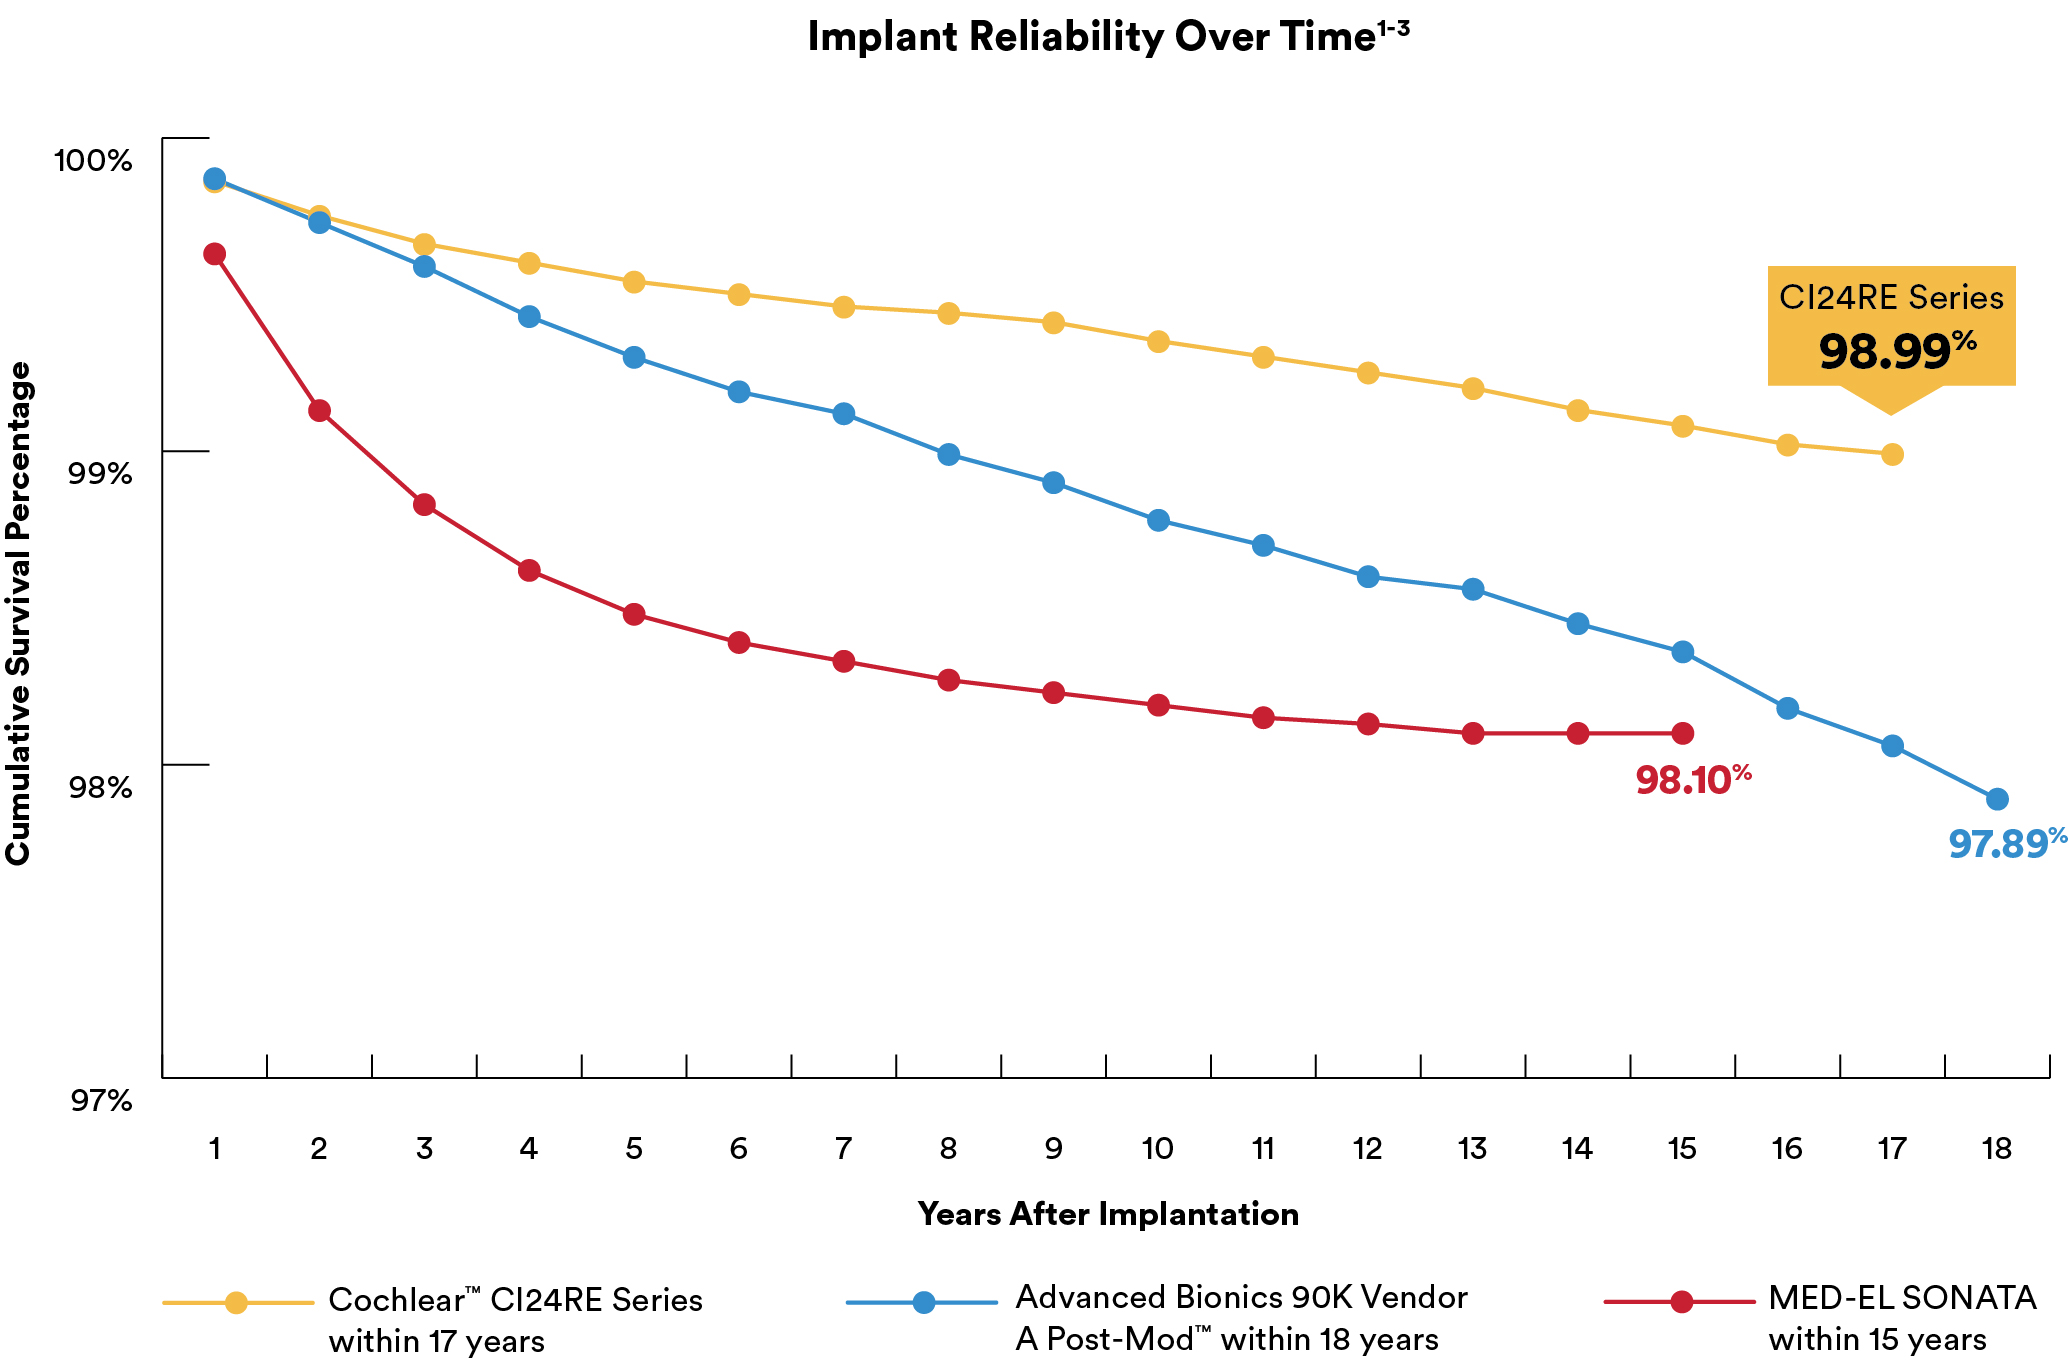 Most Reliable Over Time Chart